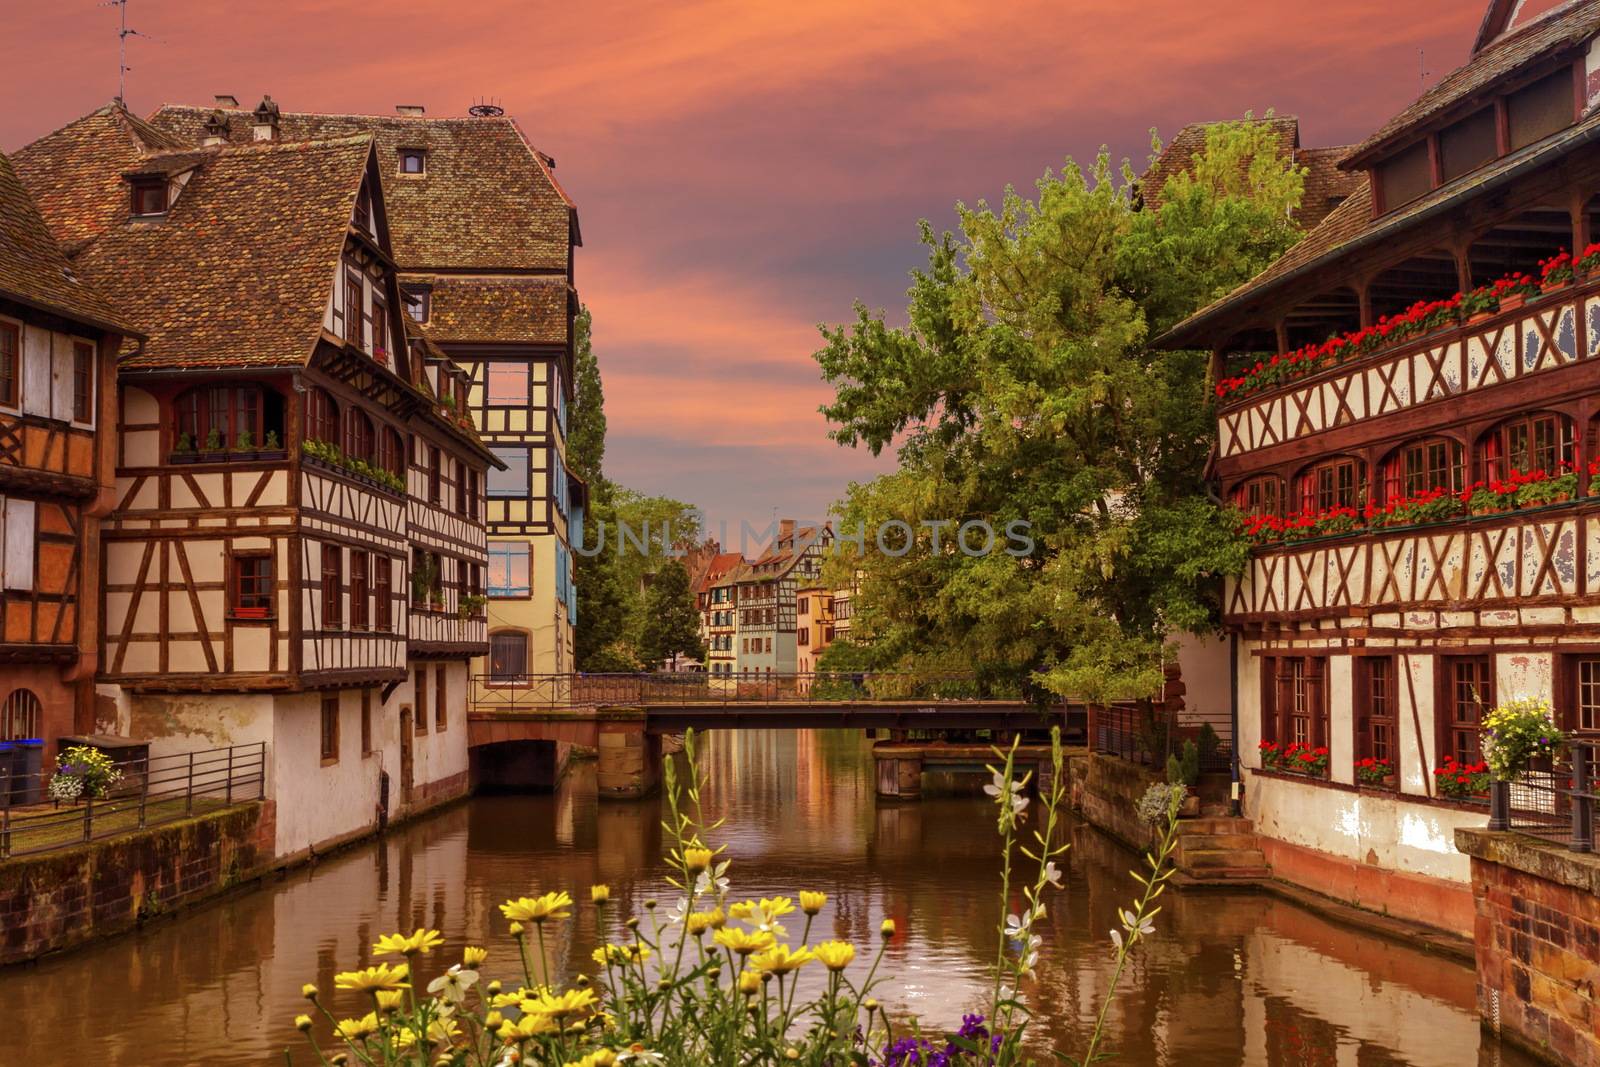 Half-timbered houses in Petite France, Strasbourg, France by Elenaphotos21